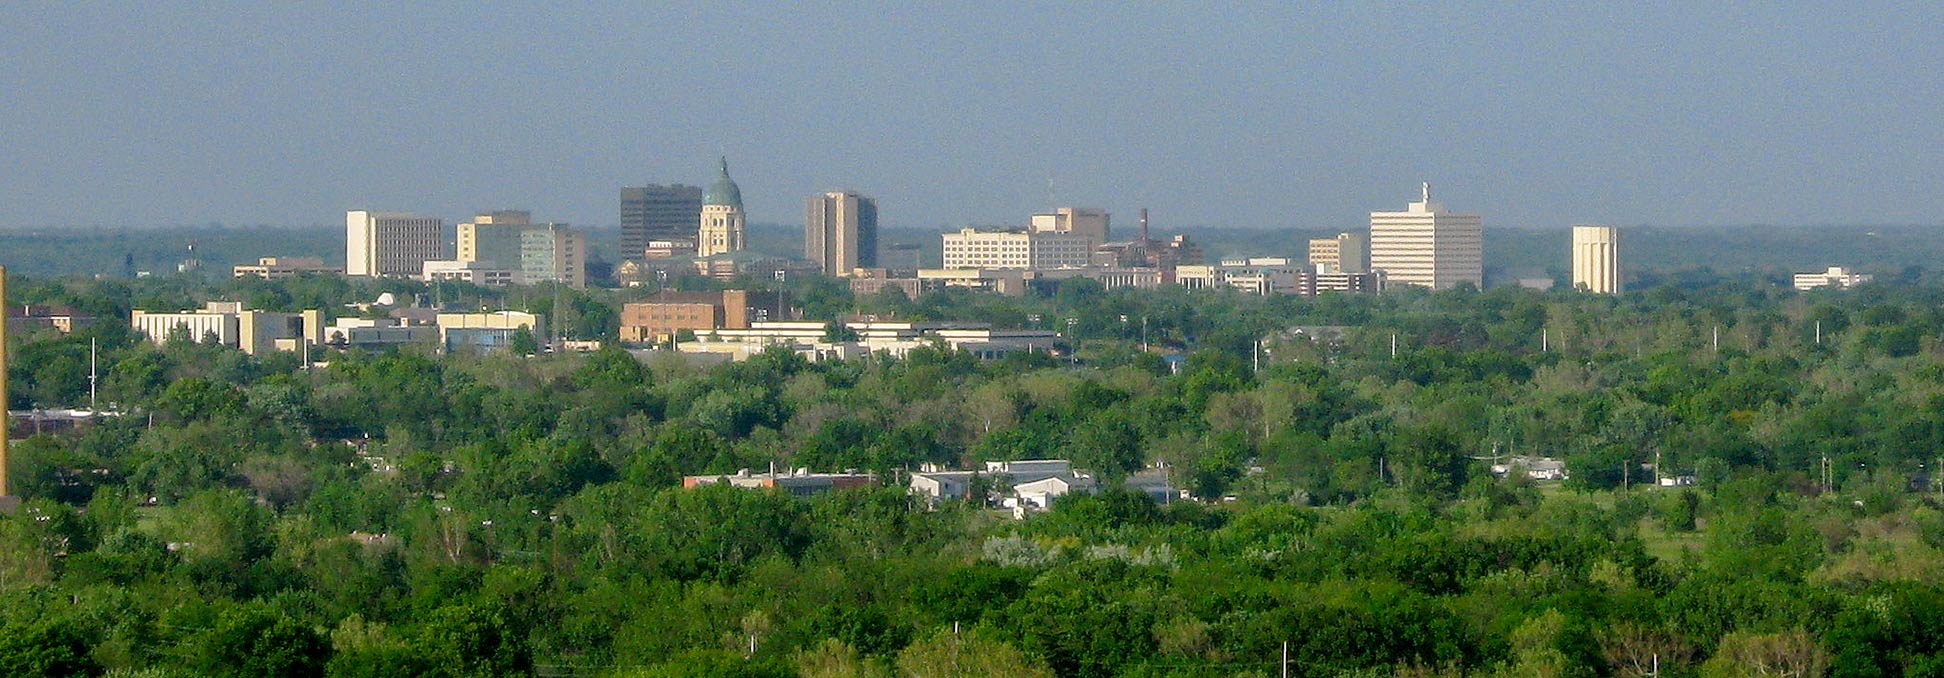 Skyline of Topeka, capital of Kansas in the US